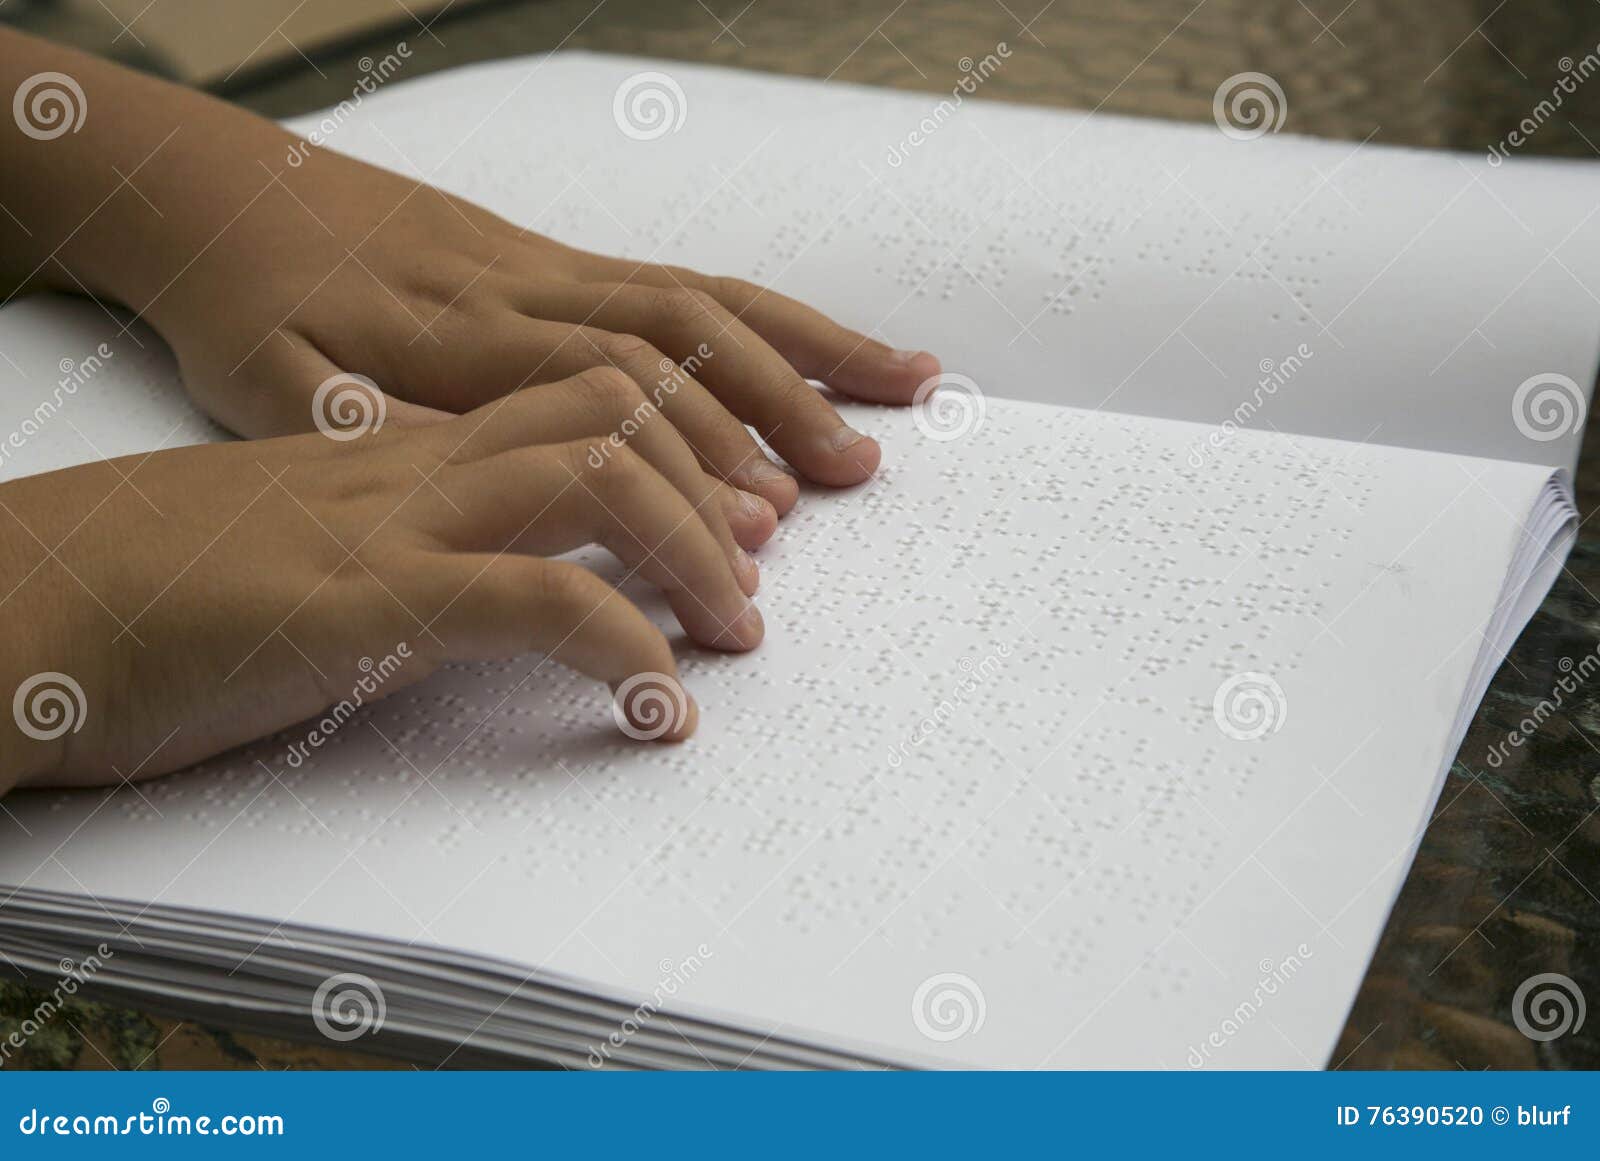 woman reading braille book